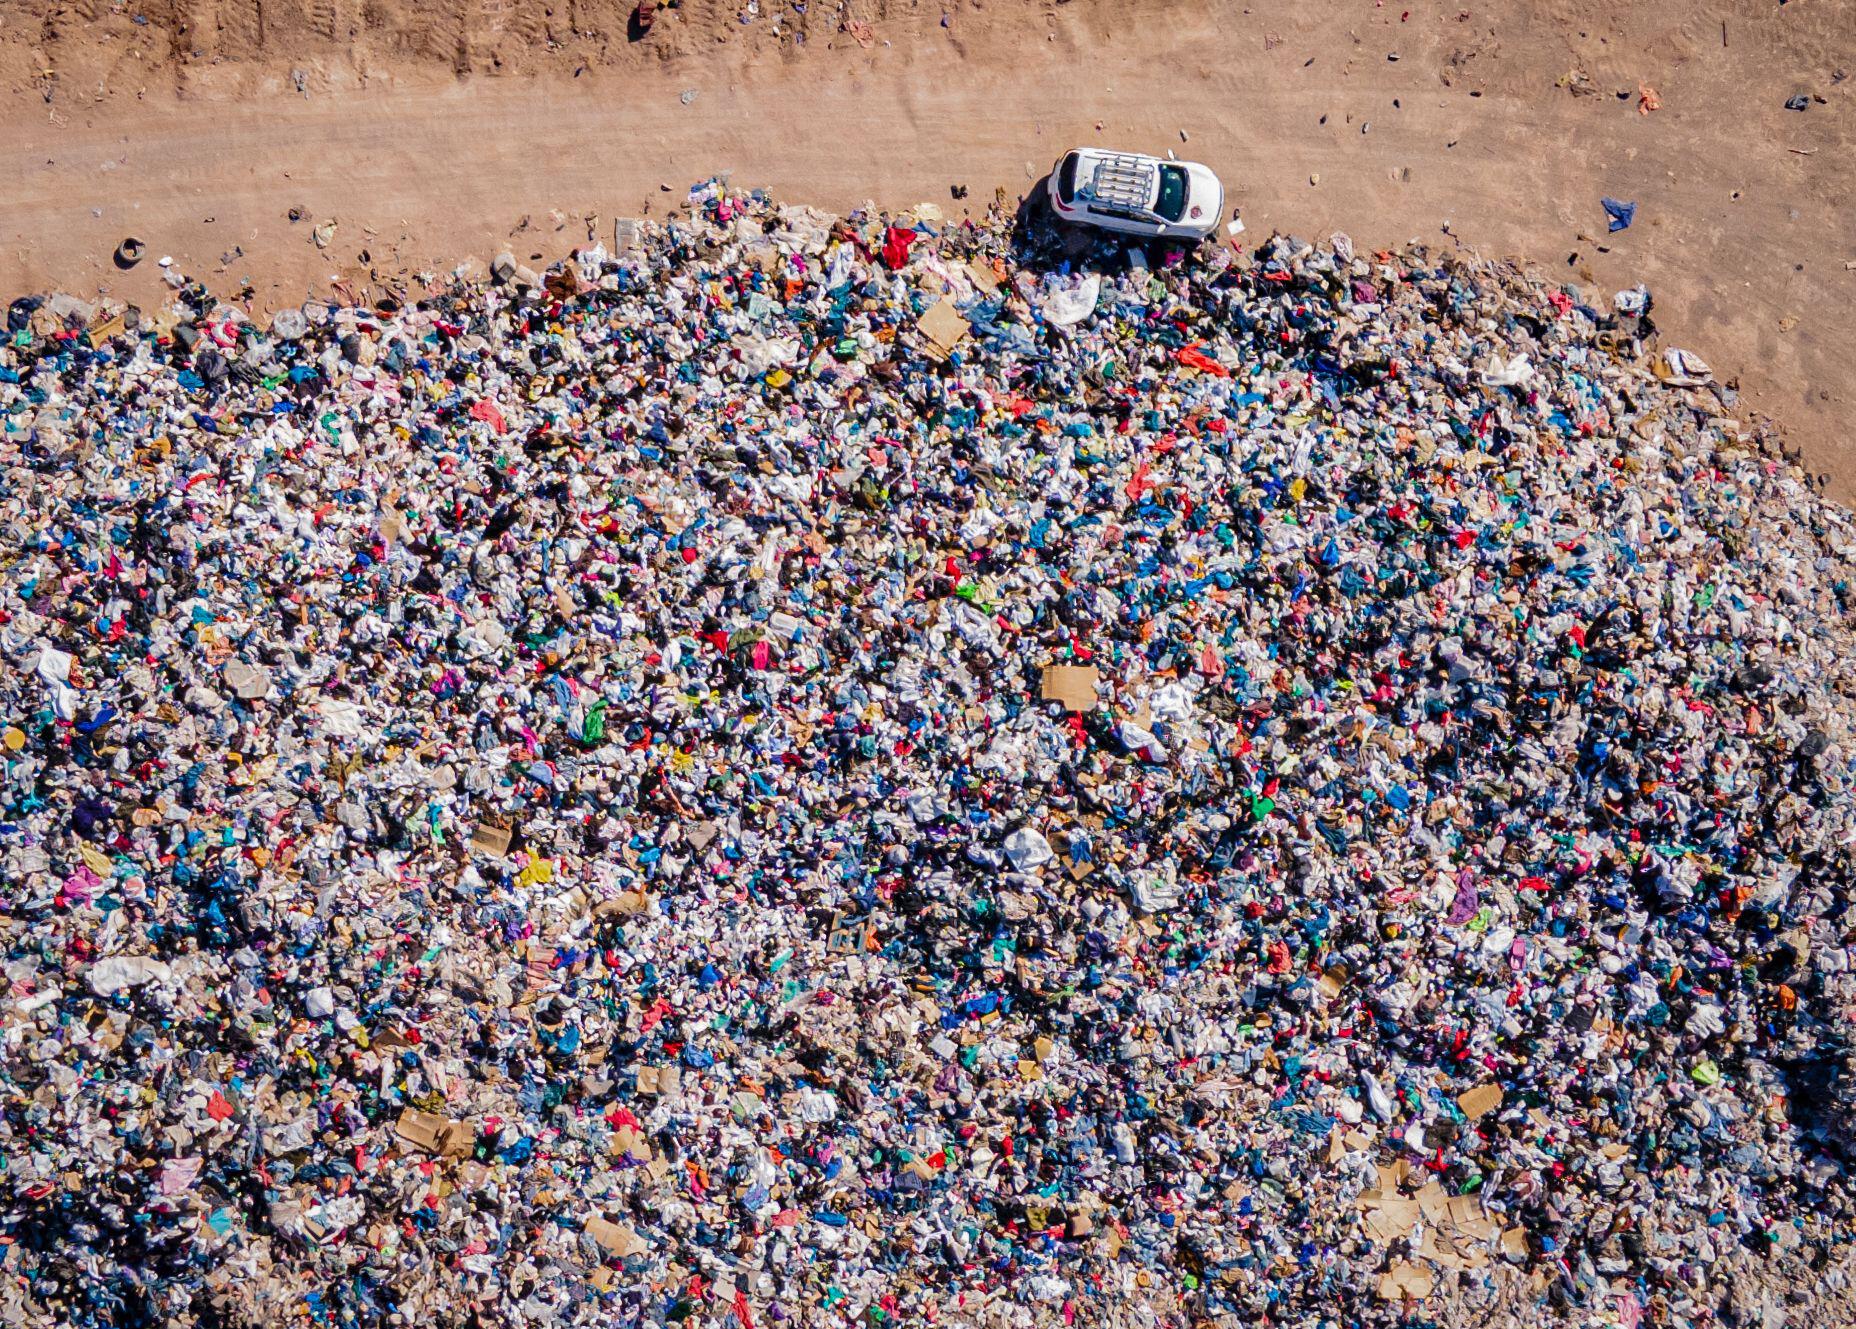 Used clothes sit in a landfill in the desert.